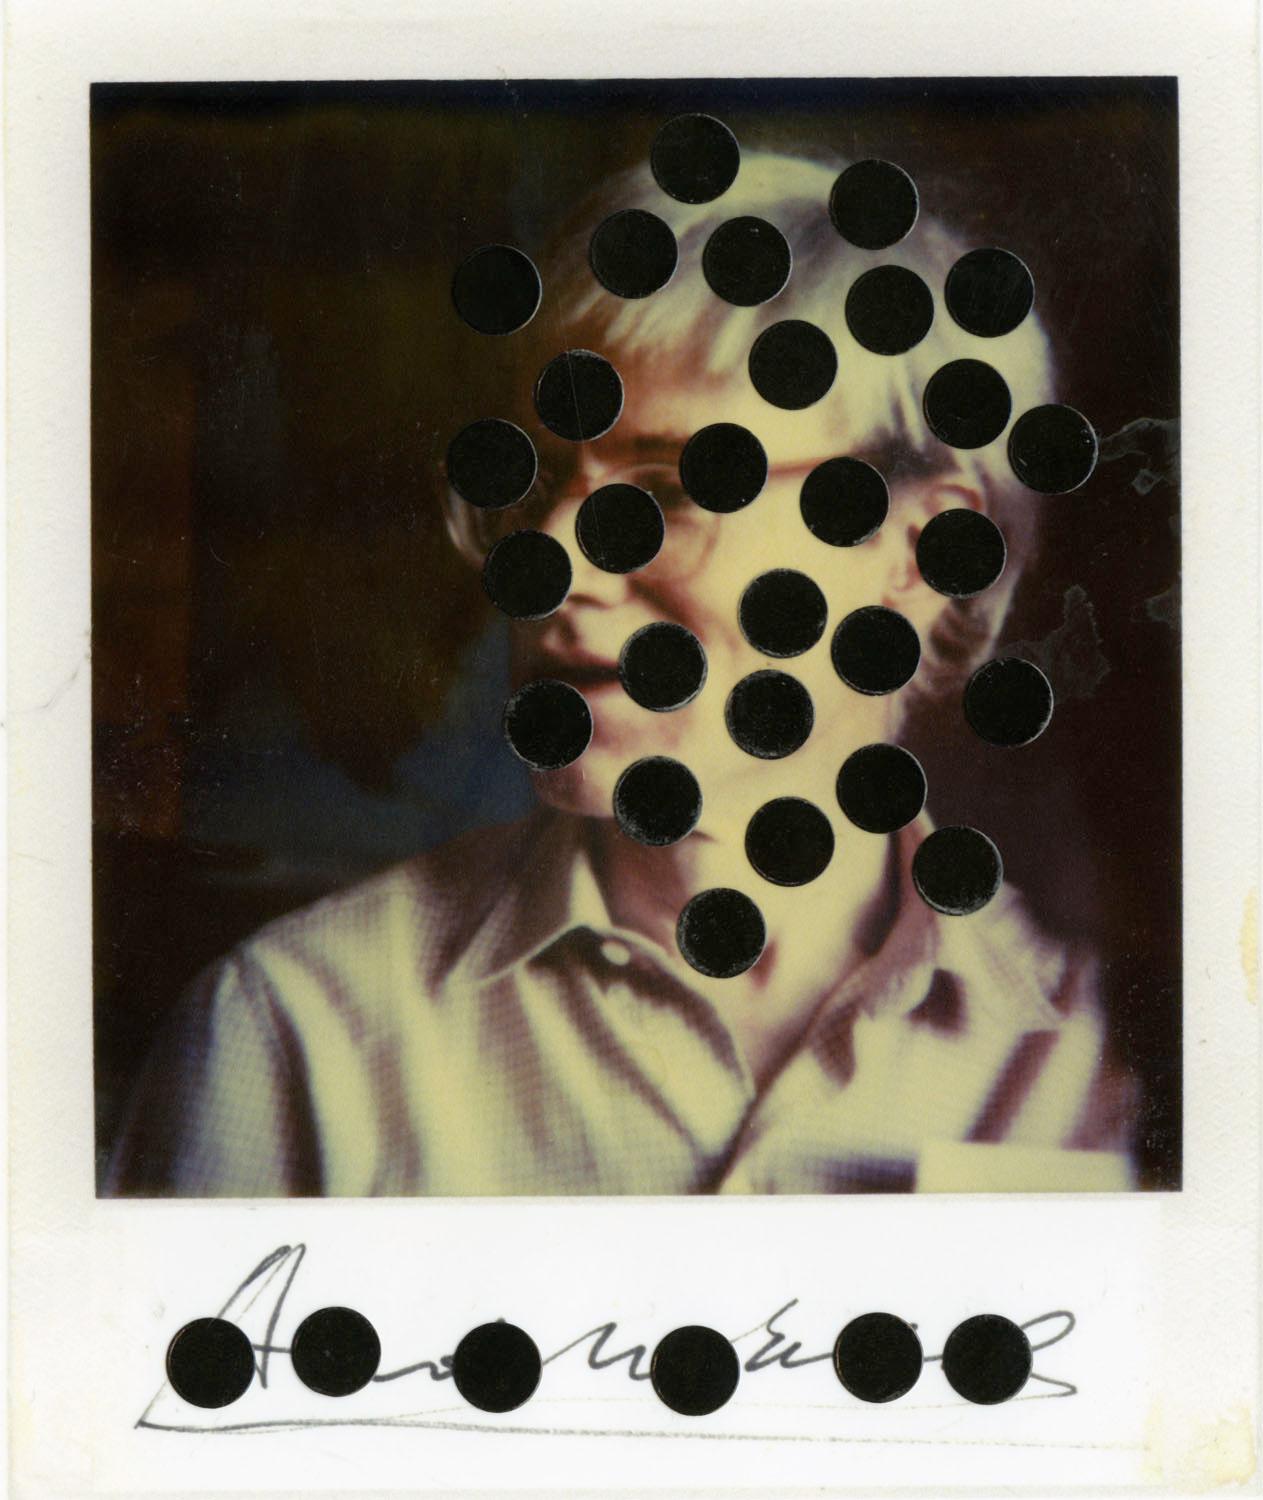 Mark Sink Color Photograph - Andy and Dots signed, 1982